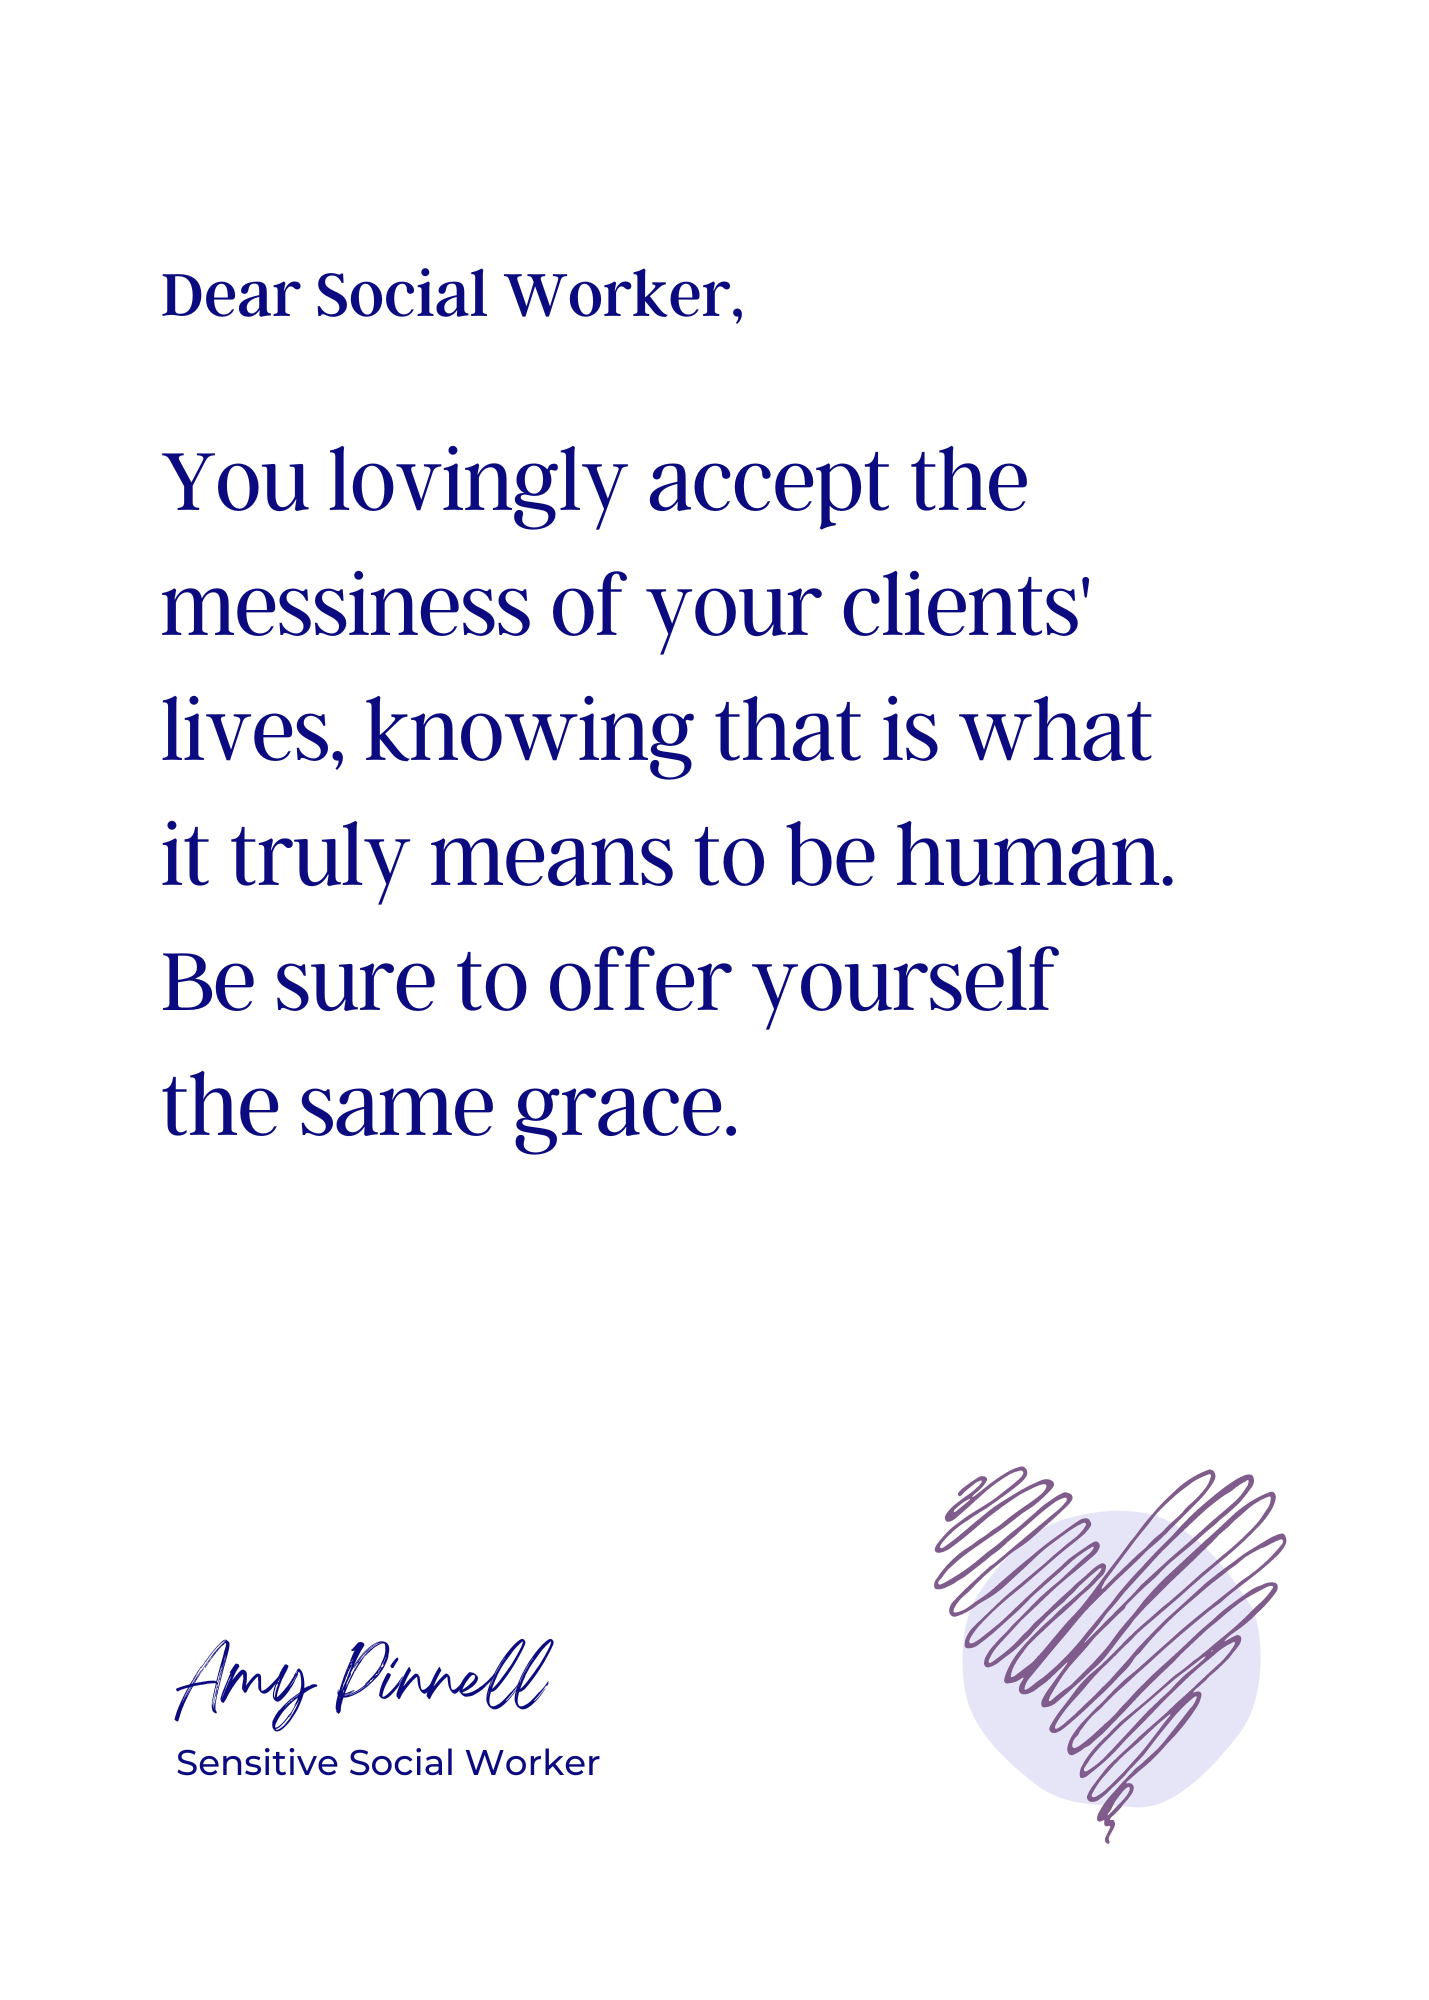 An electronic version of the print is shown. The print is white with dark purple font and reads "Dear Social Worker, You lovingly accept the messiness of your clients' lives, knowing that is what it truly means to be human. Be sure to offer yourself the same grace. Amy Pinnell, Sensitive Social Worker". In the bottom right corner of the print is a sketch of a scribbled purple heart.